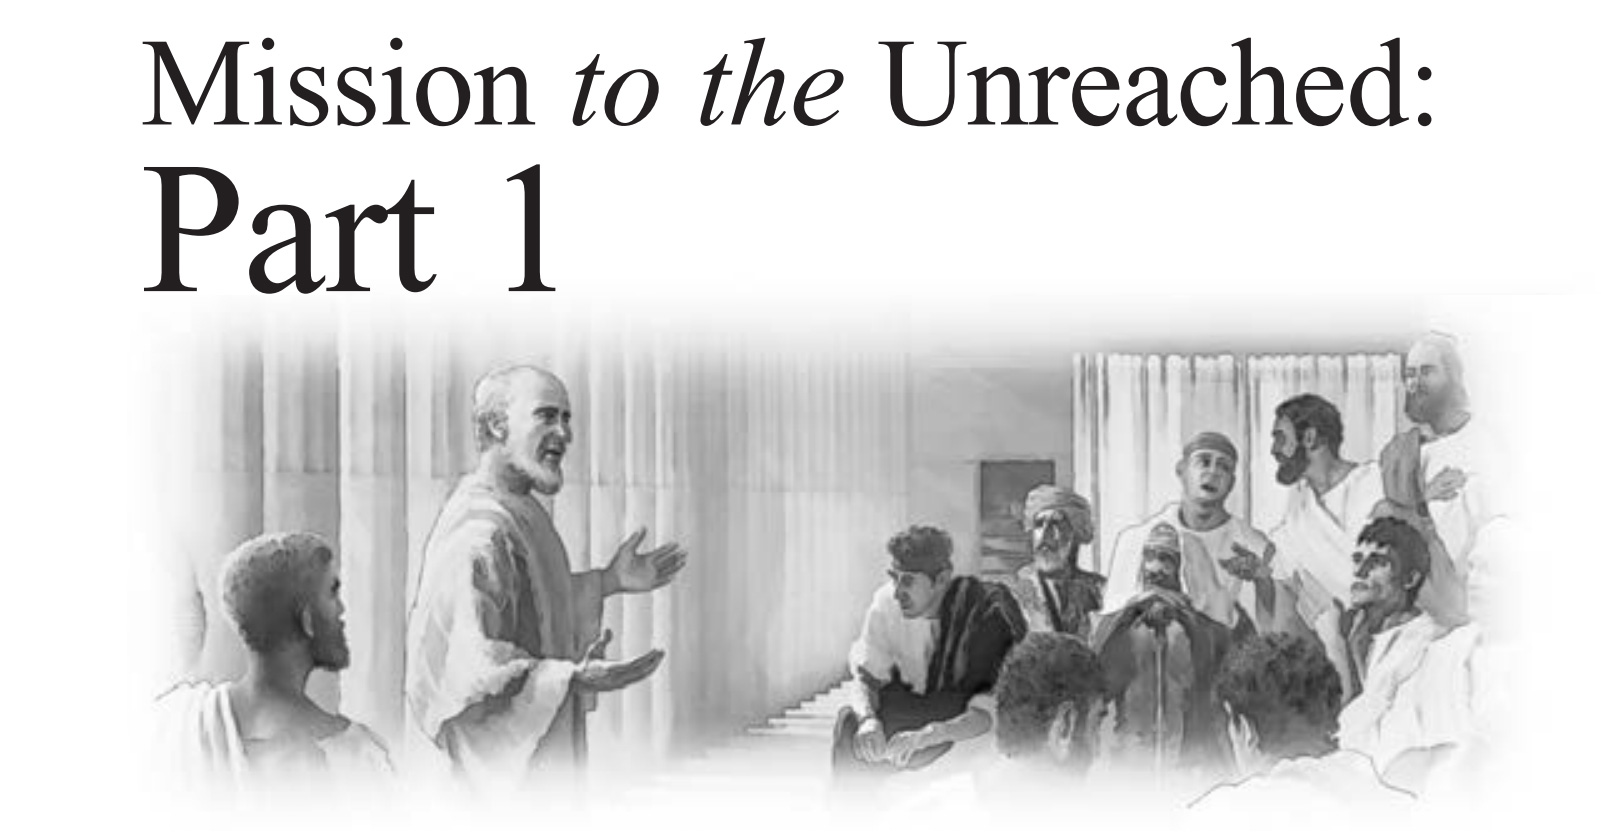 Mission to the Unreached: Part 1